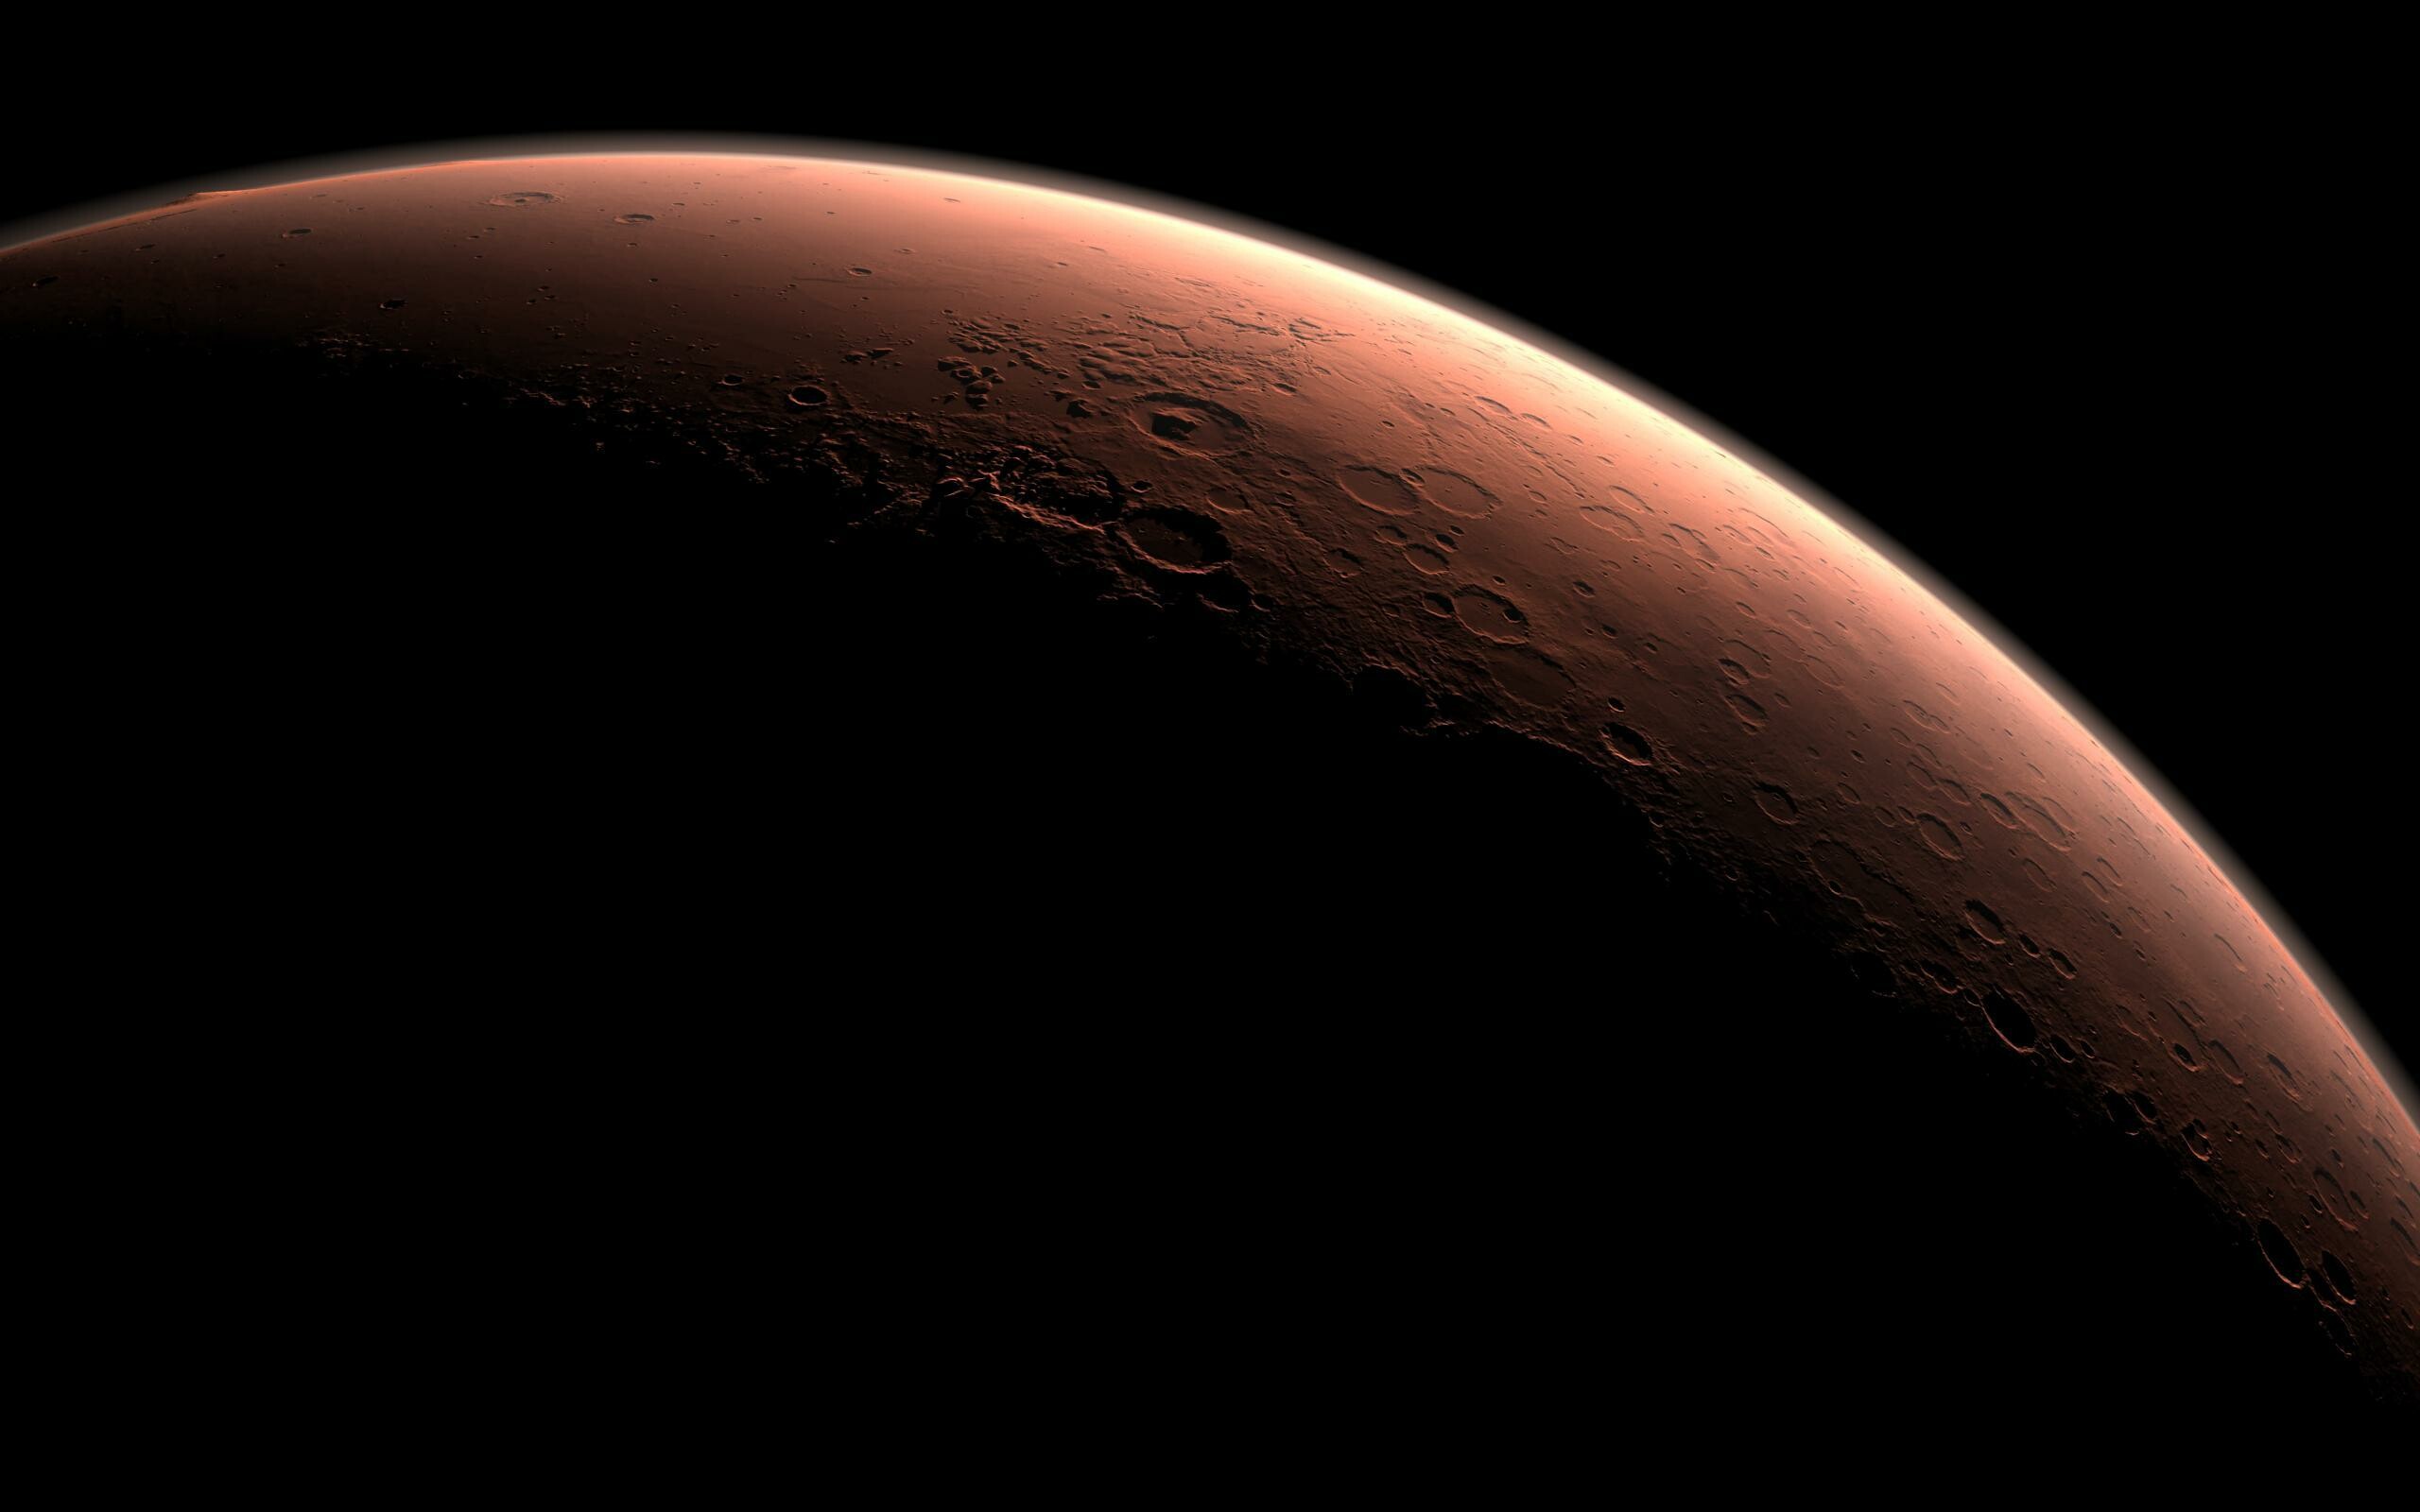 Mars: The planet is home to the tallest mountain in the solar system, Olympus Mons. 2560x1600 HD Wallpaper.